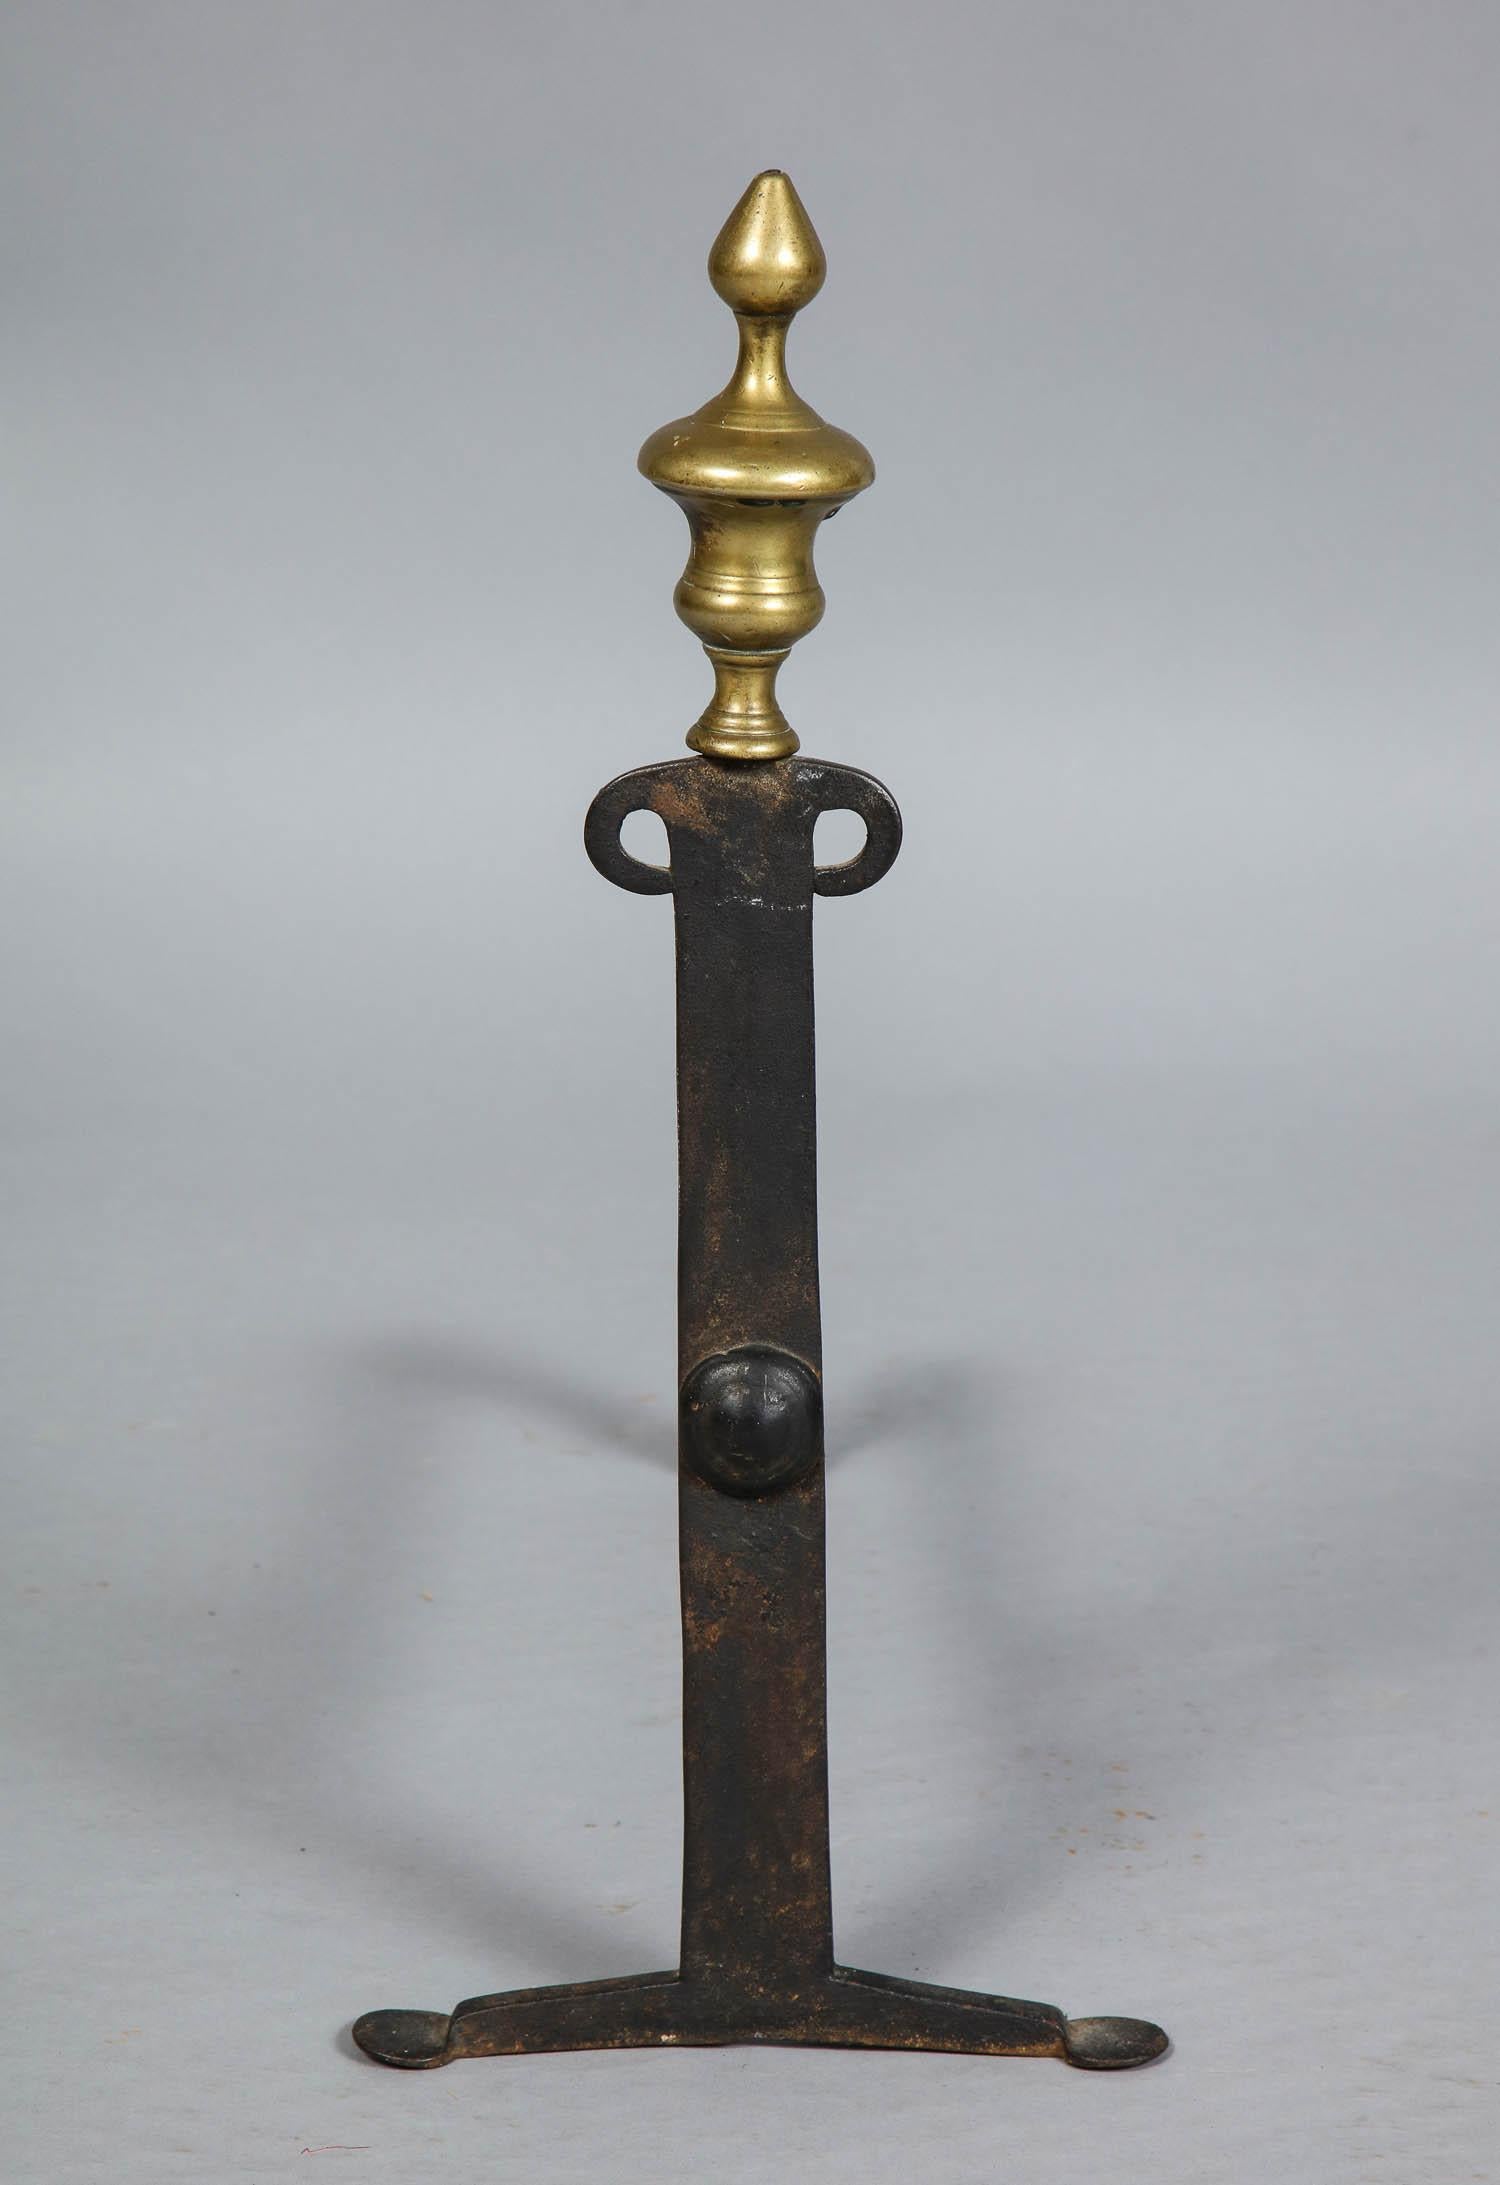 North American Pair of 18th Century Brass and Iron Andirons